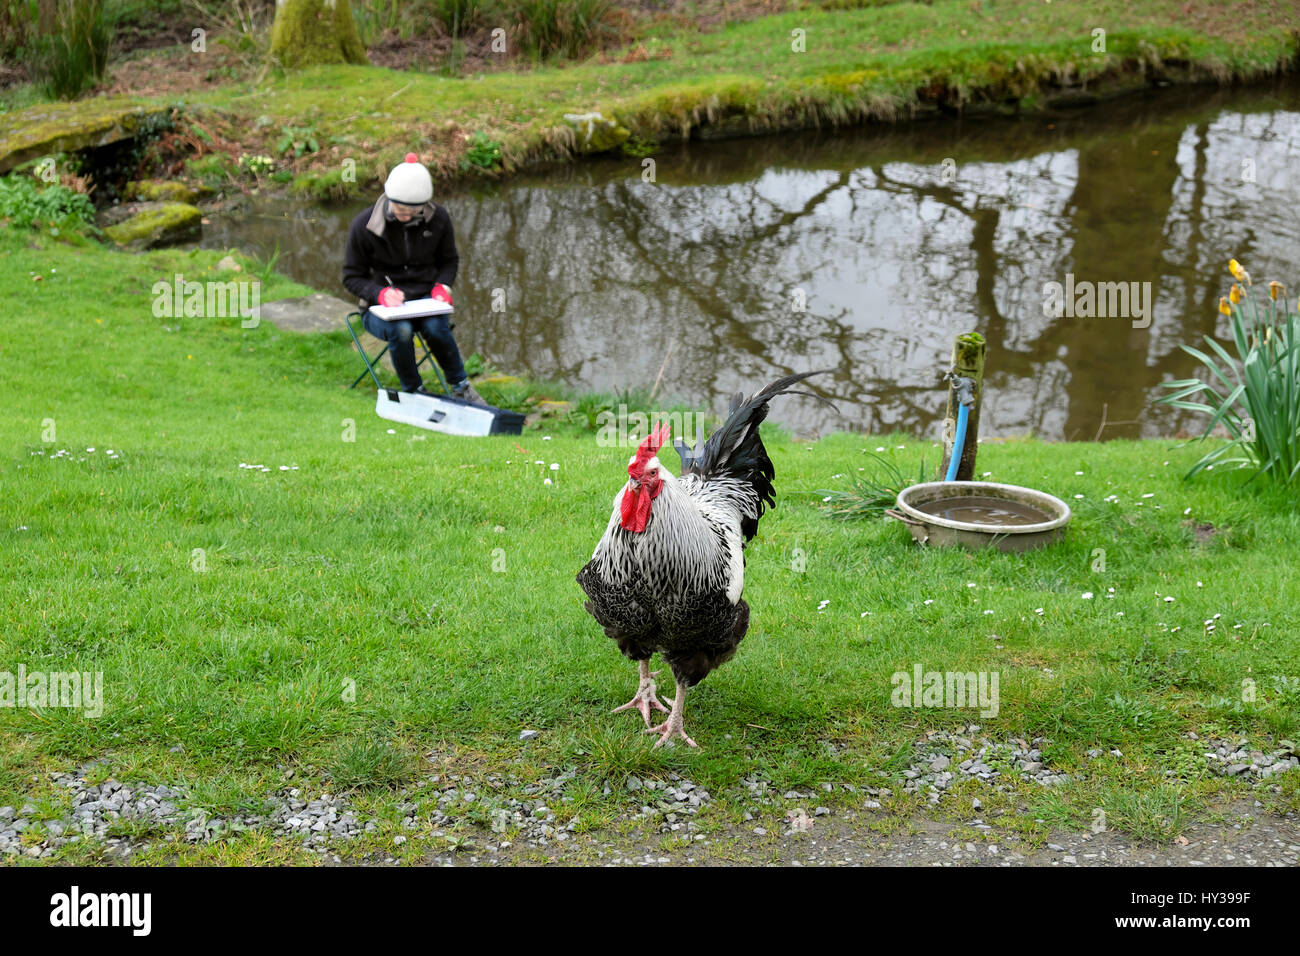 A woman artist sitting outside by a garden pond in spring drawing a picture of cockerel rooster poultry chickens in Wales UK  KATHY DEWITT Stock Photo